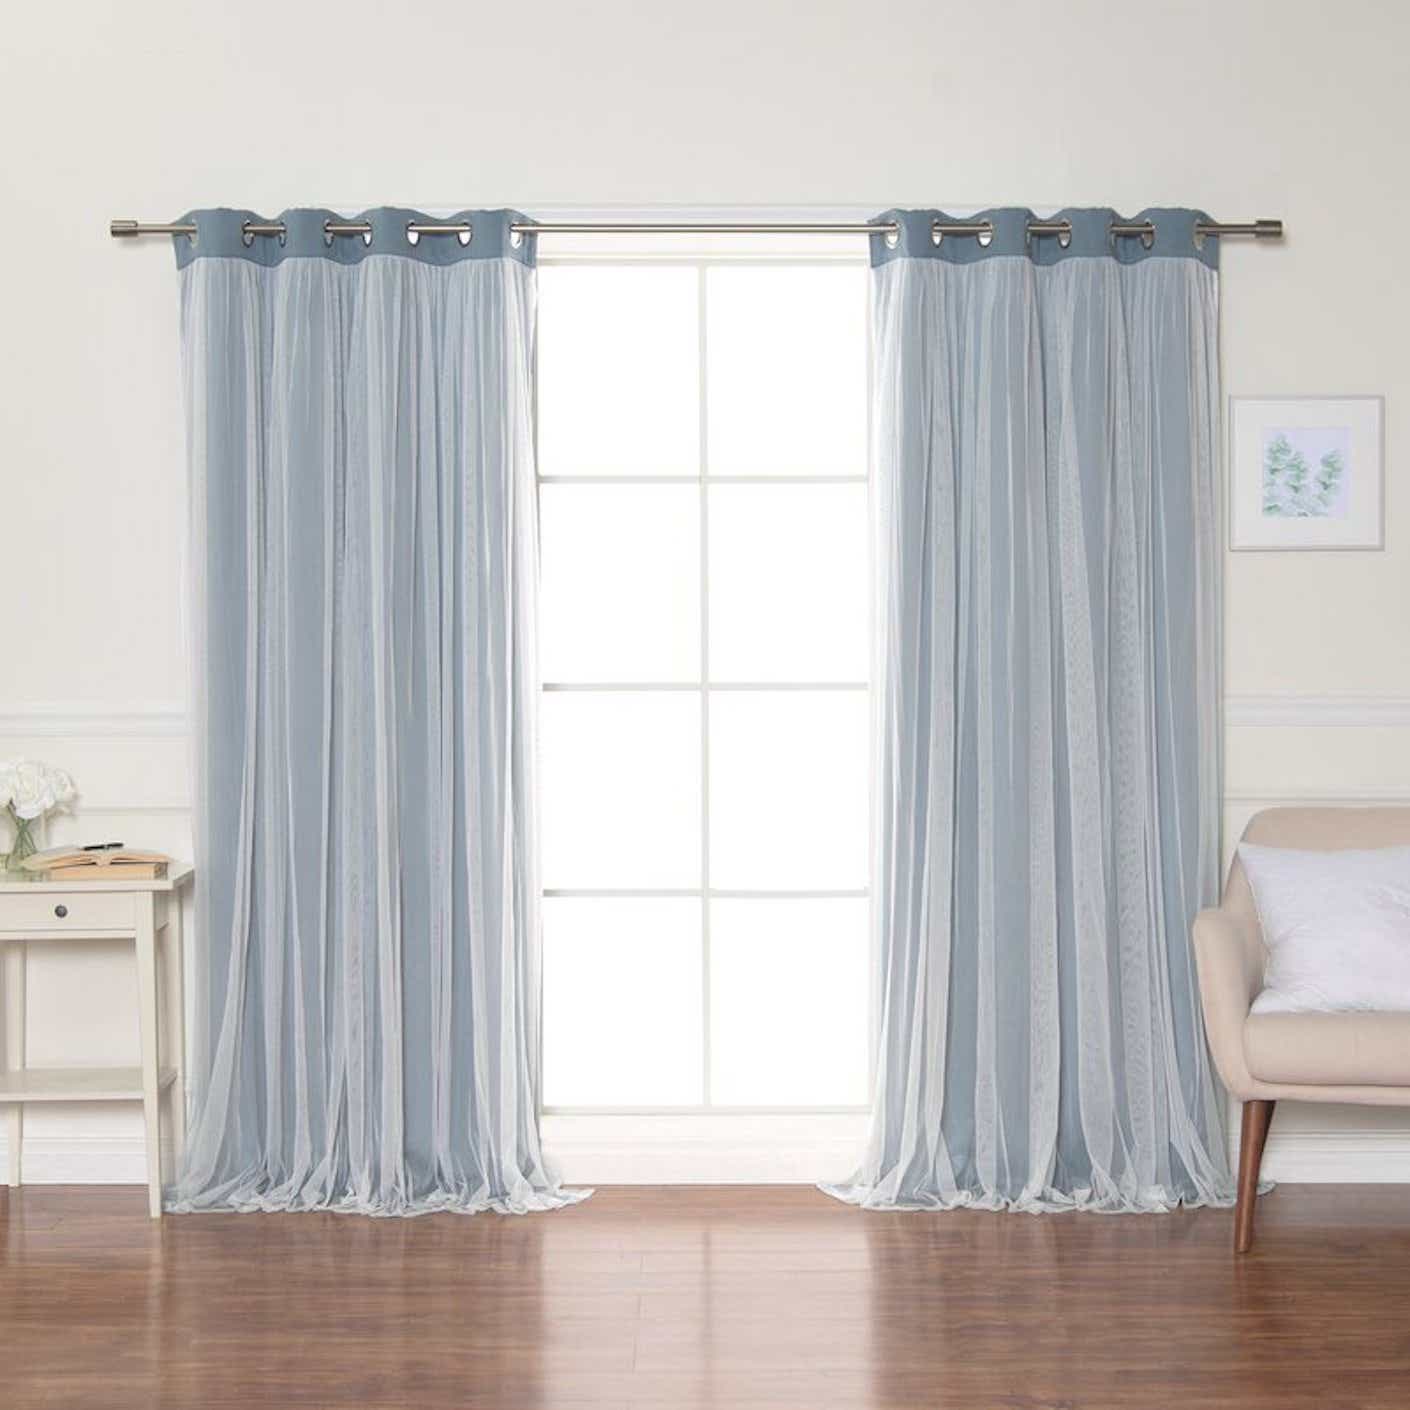 solid blackout grommet curtain panels in a living room with big window